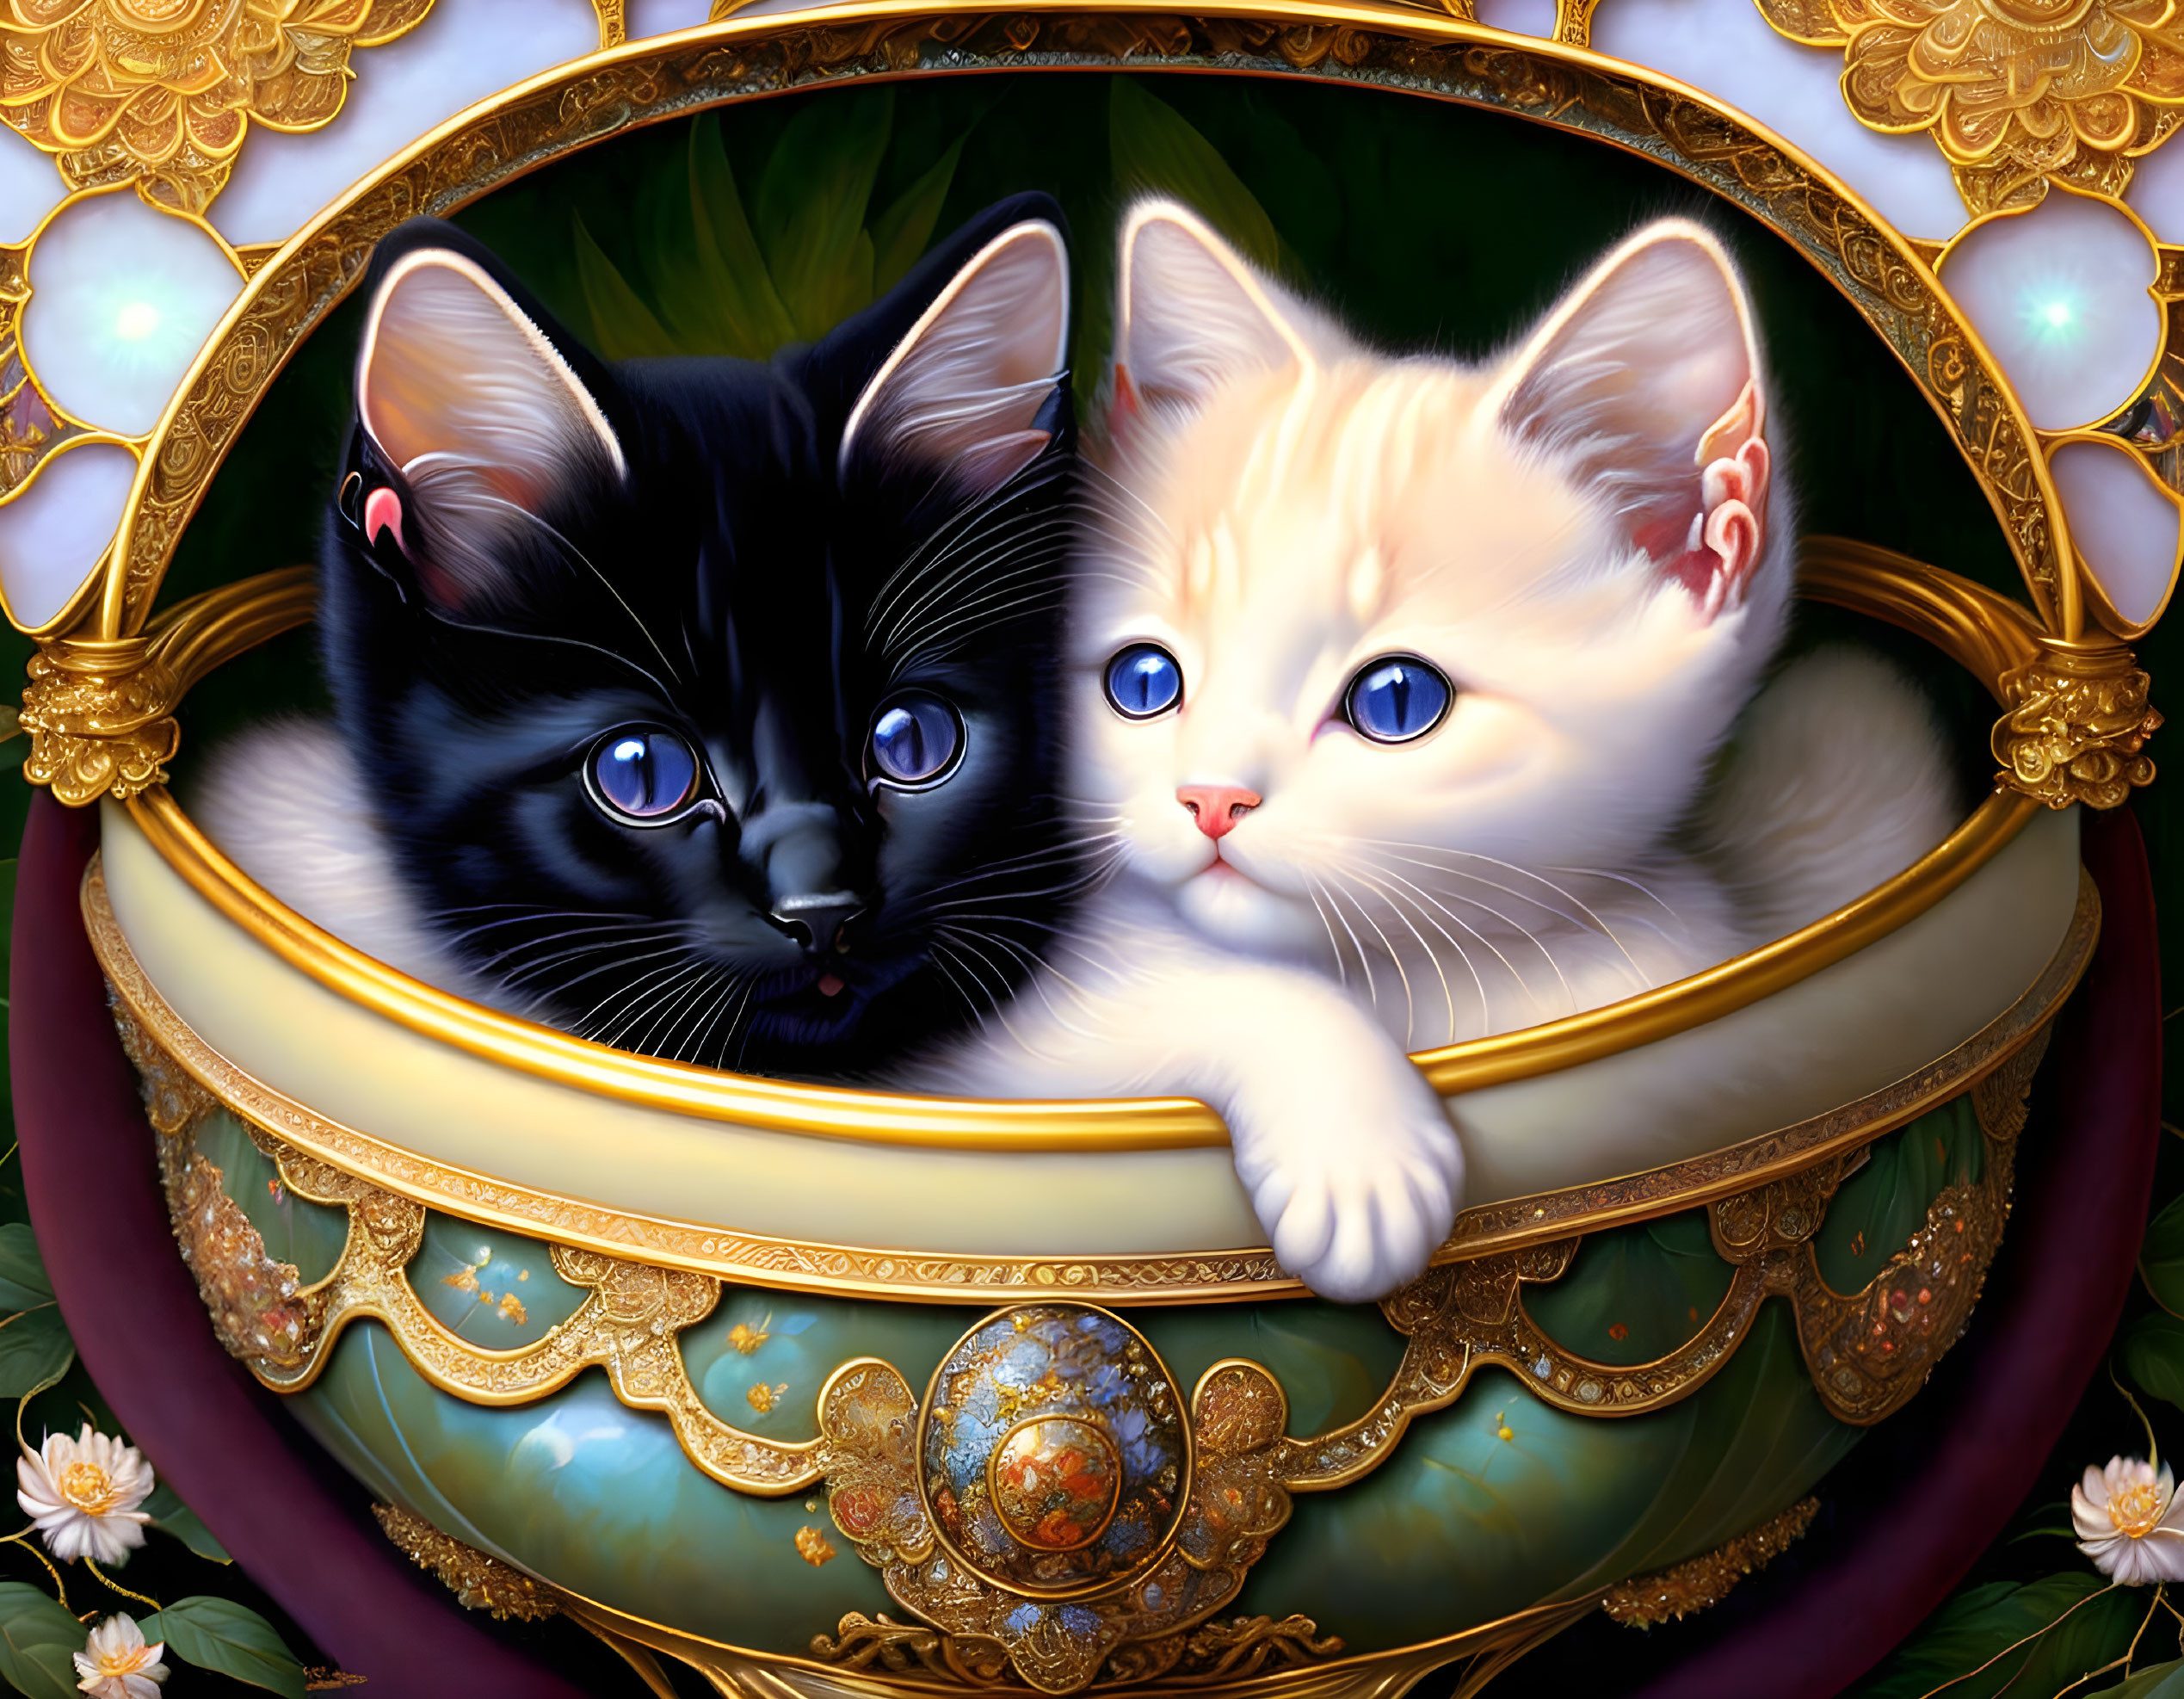 Adorable black and white kittens in ornate bowl with floral motifs